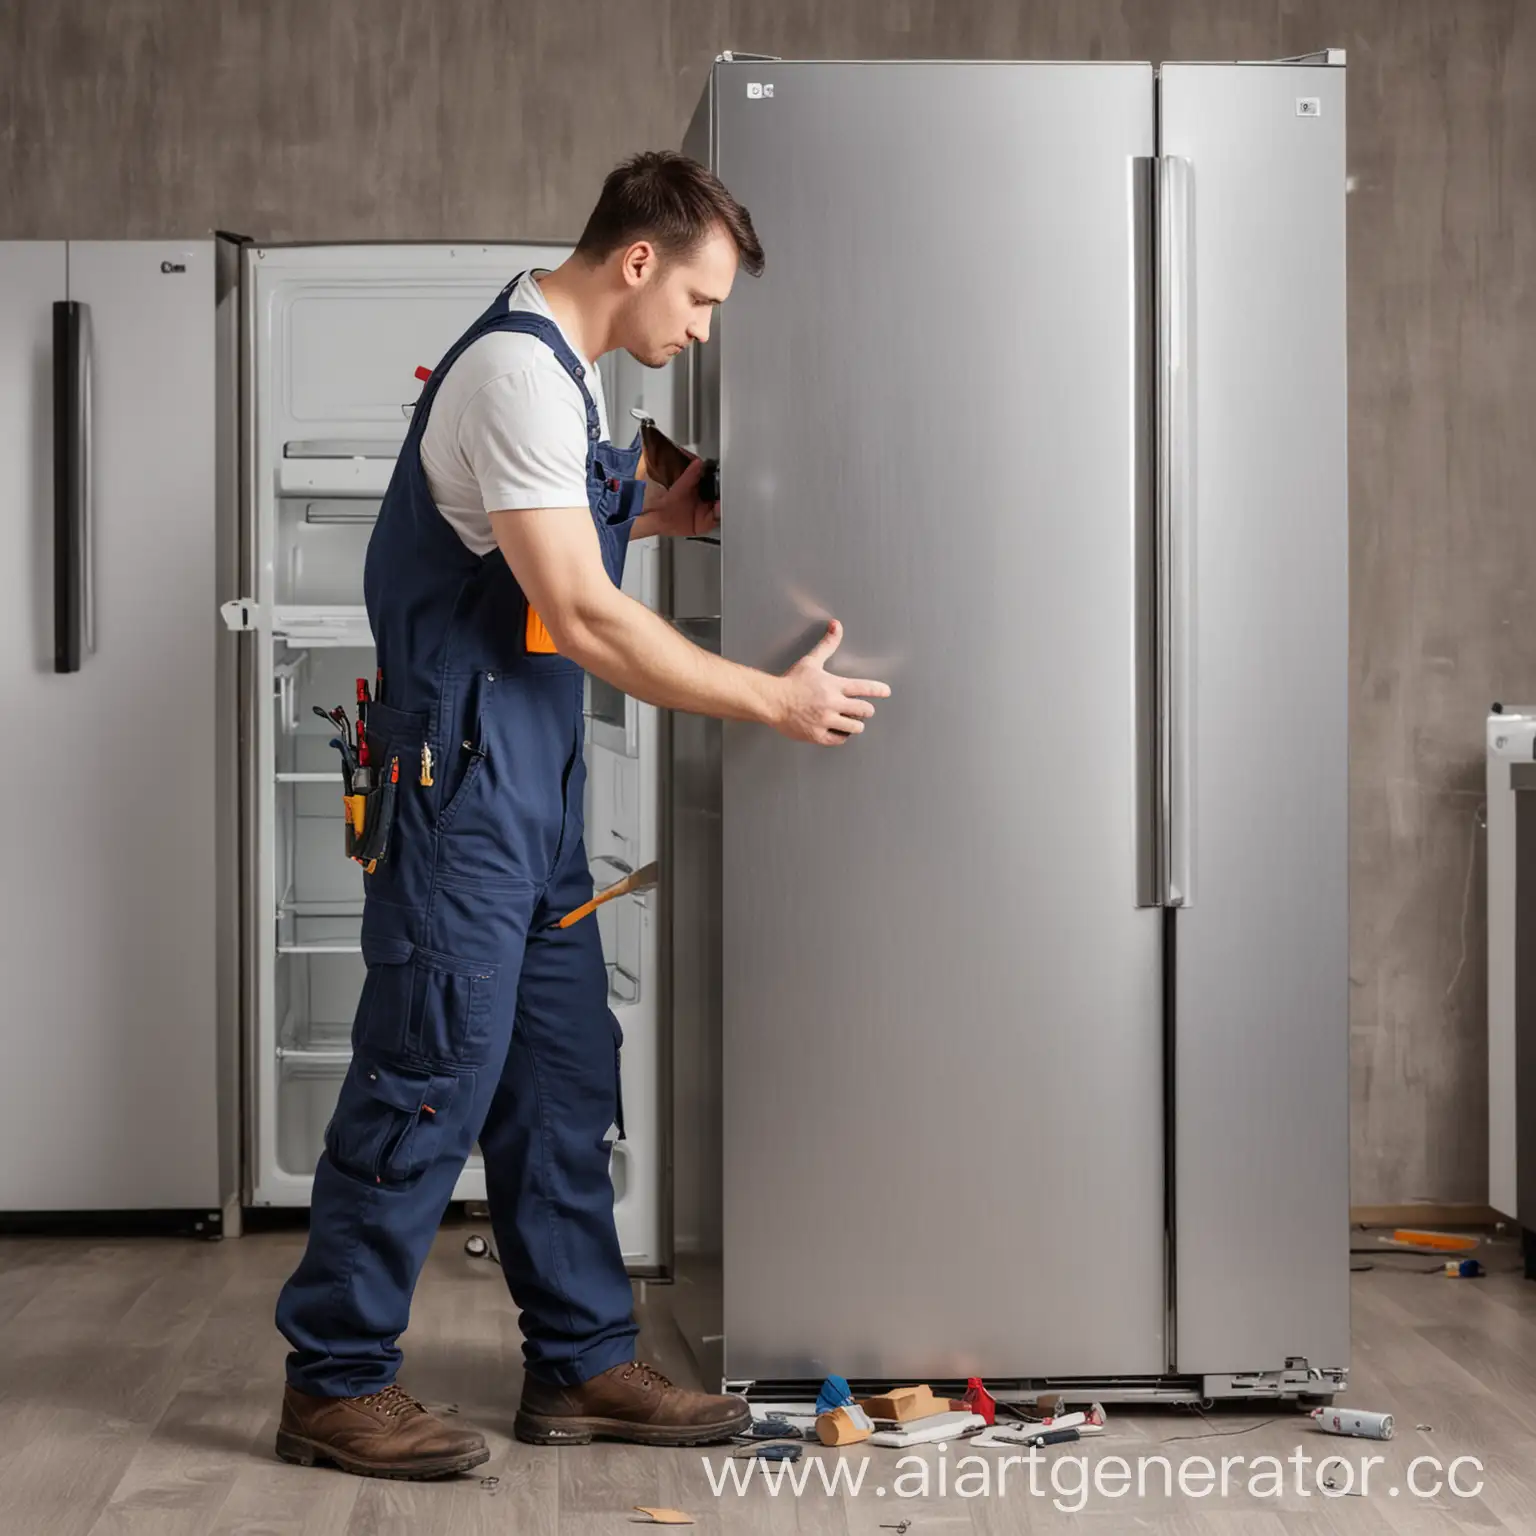 Repairman-in-Overalls-Working-on-Disassembled-LG-Refrigerator